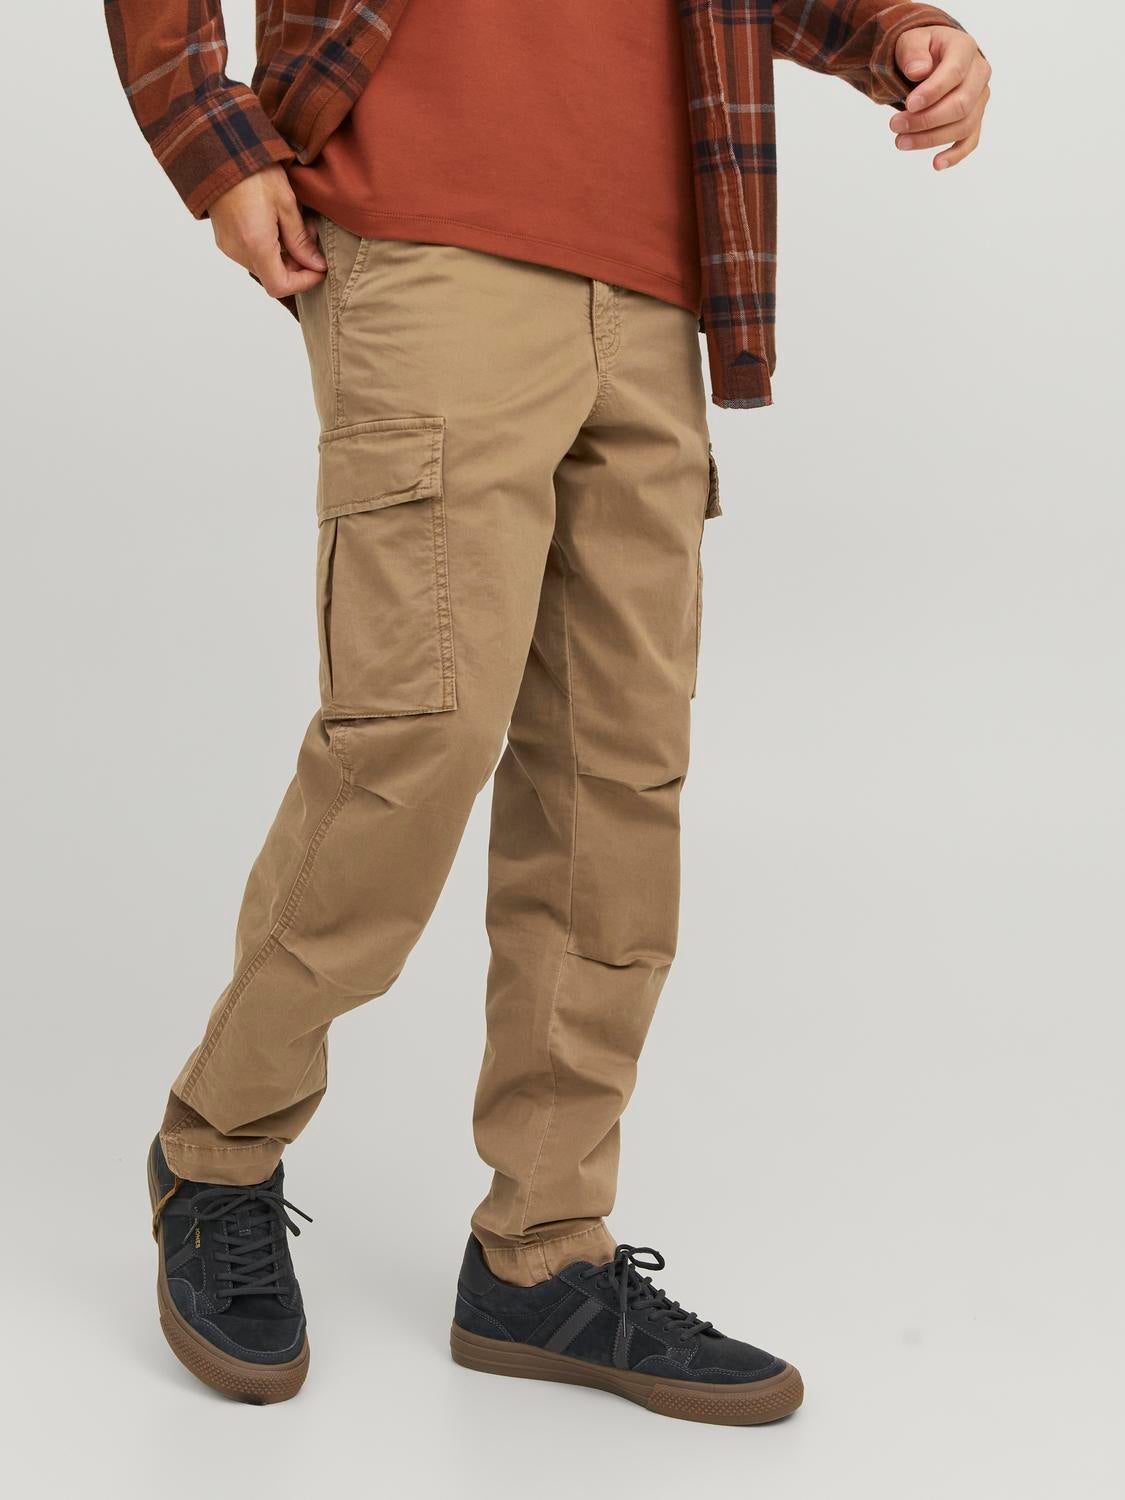 Sell Jack and Jones Exclusive Export Quality 6pockets Cargo Pants |  gintaa.com